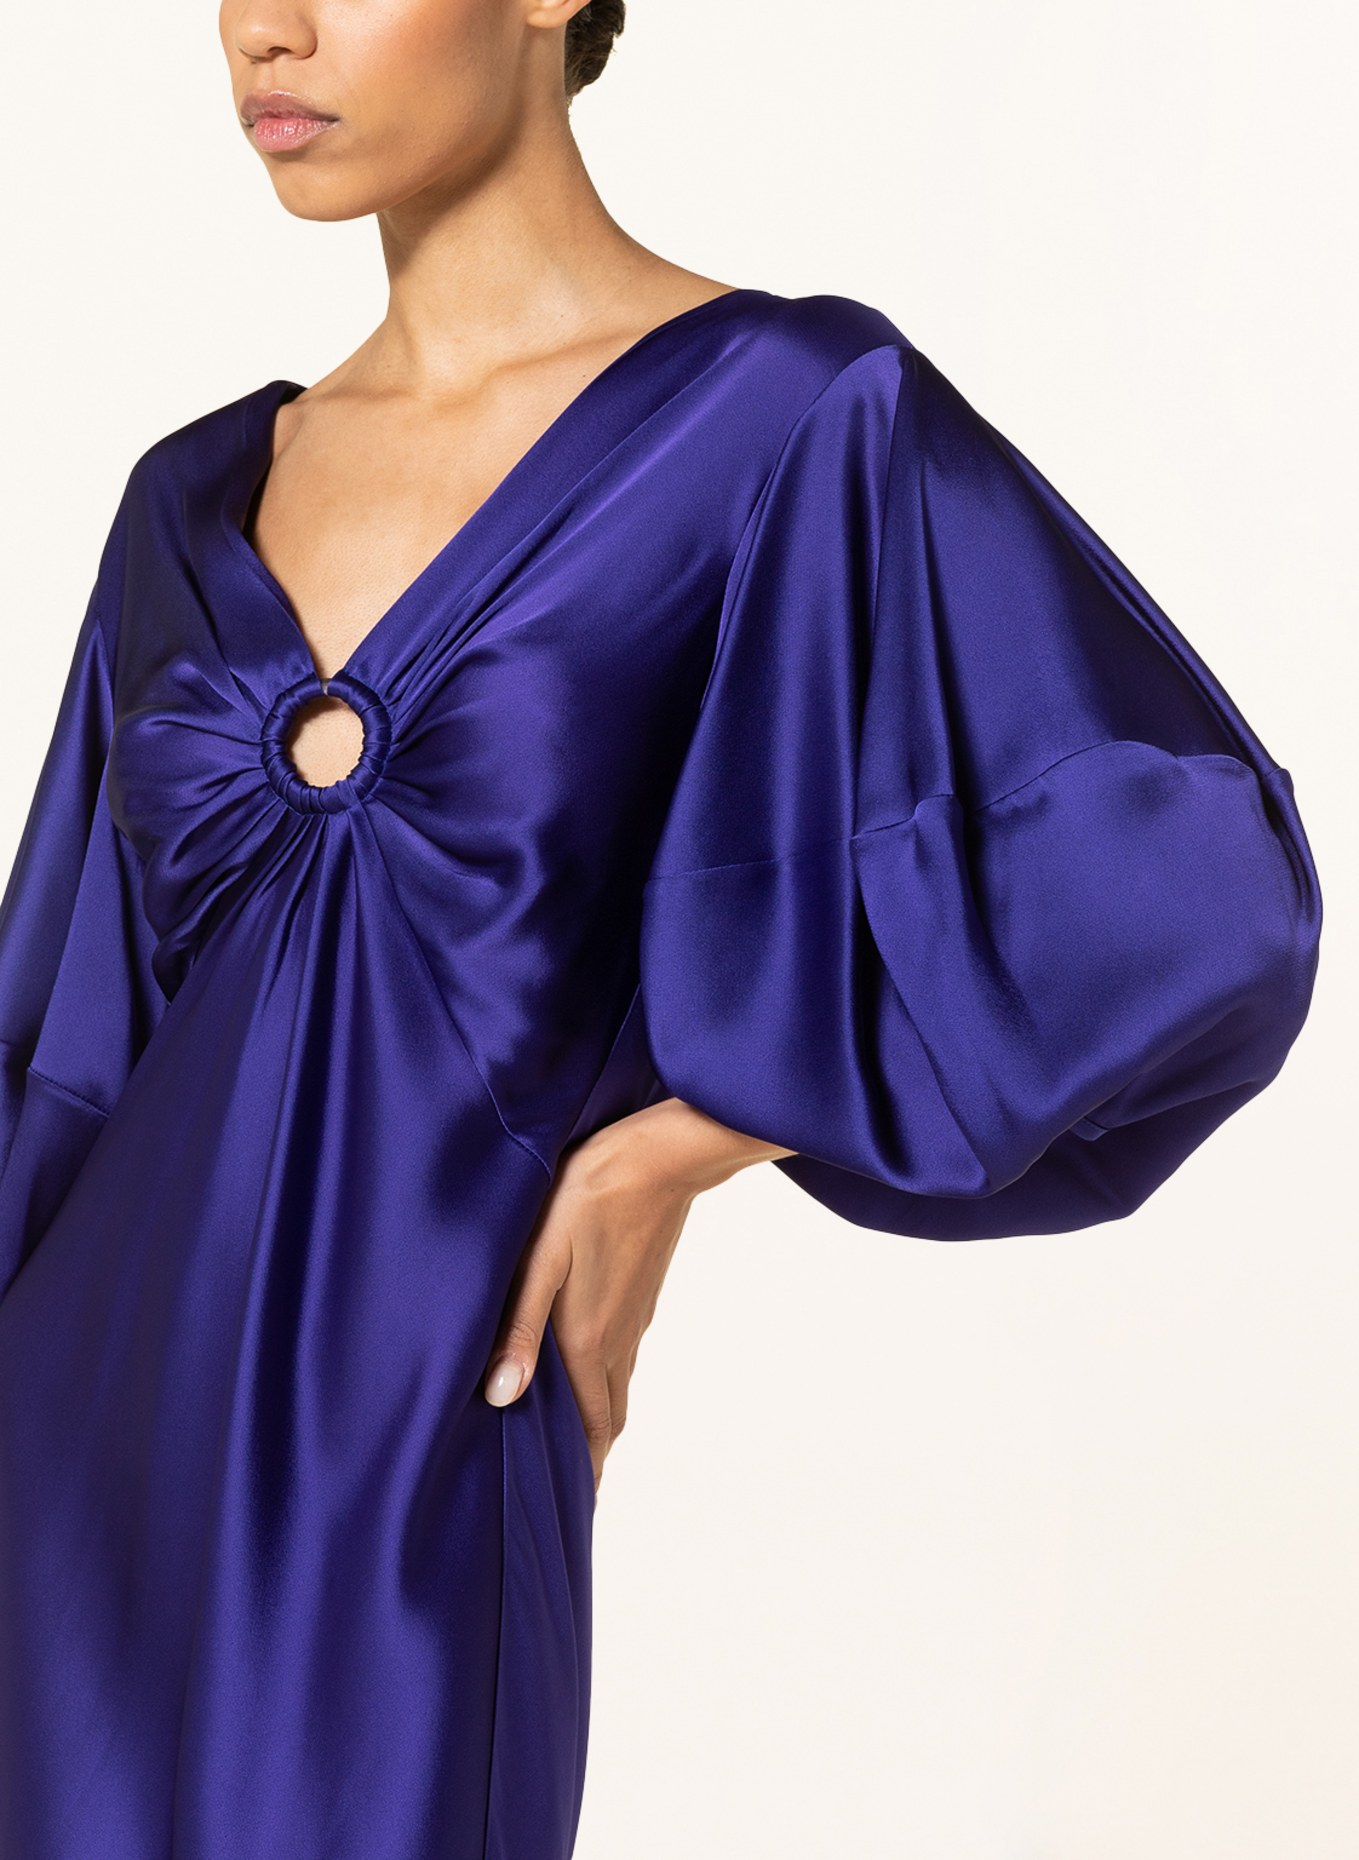 STELLA McCARTNEY Satin dress with 3/4 sleeves, Color: PURPLE (Image 4)